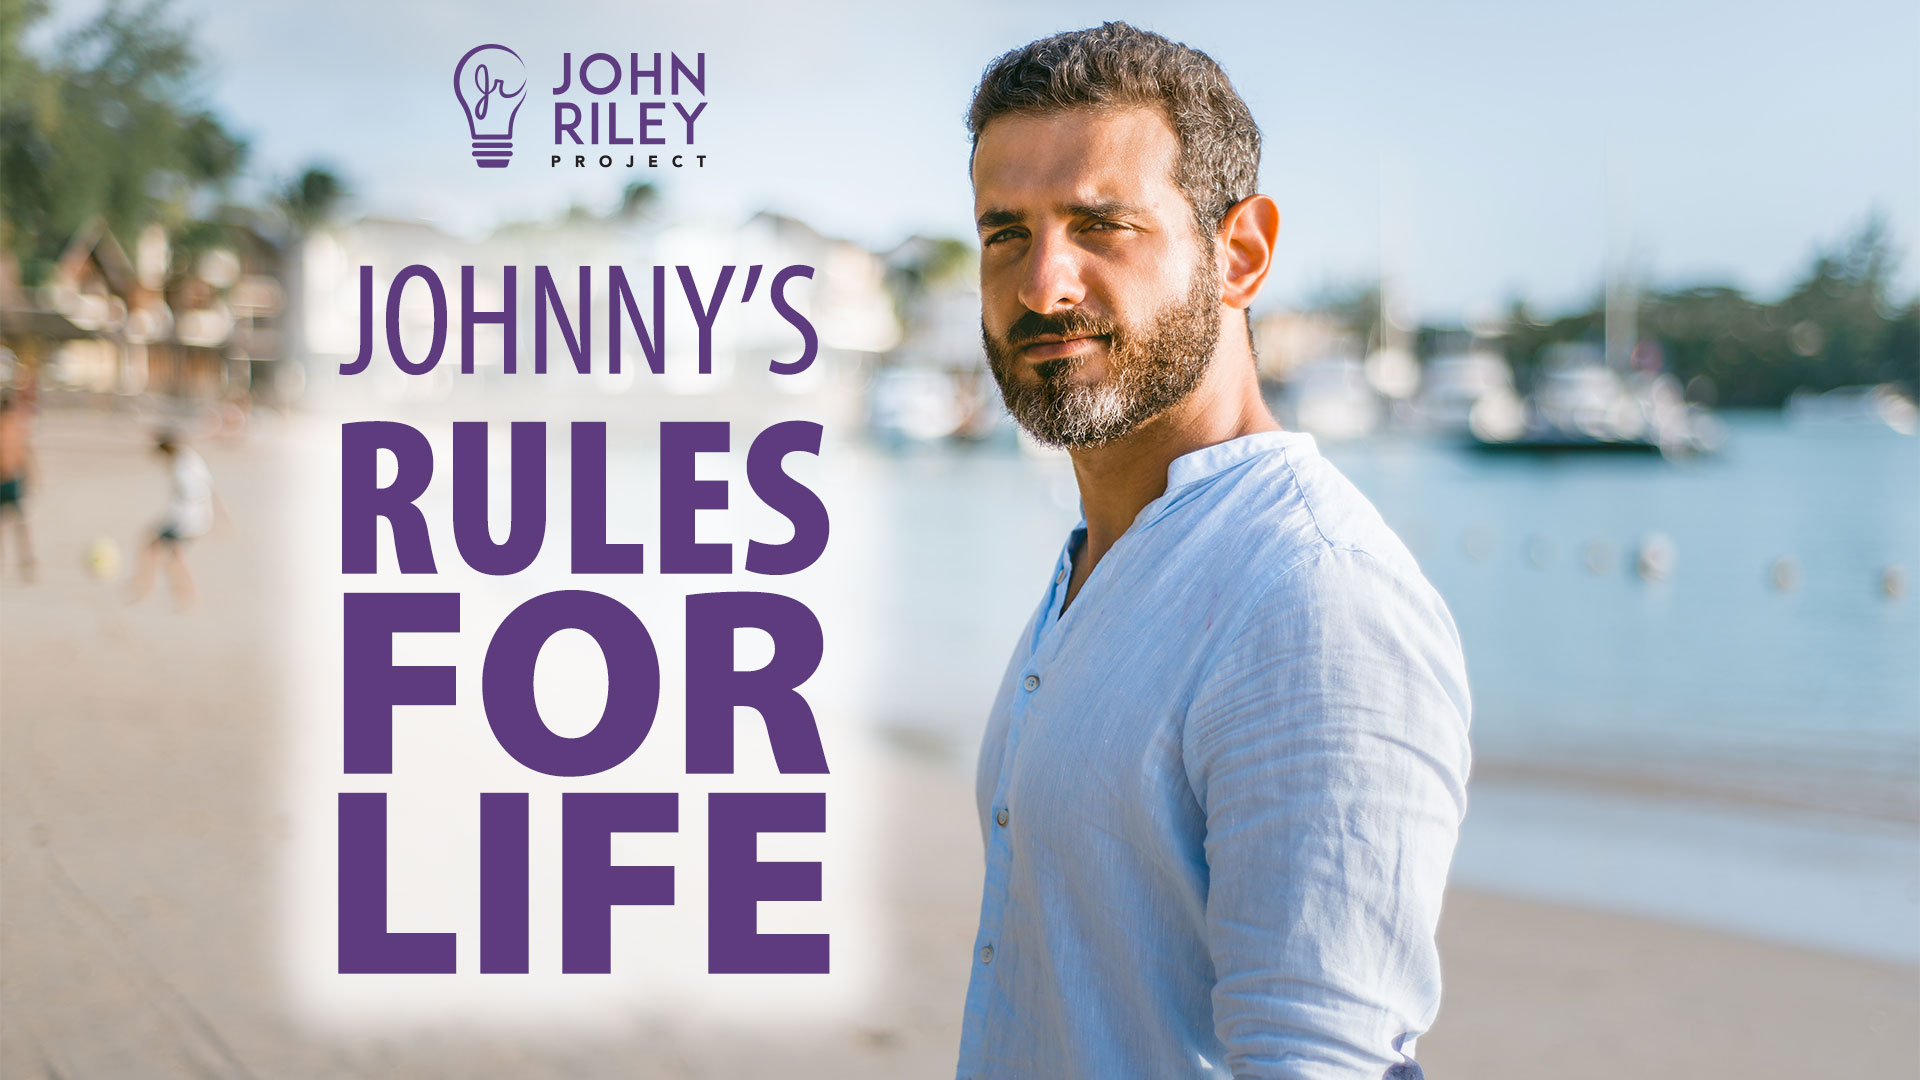 johnnys rules for life, john riley project, jrp0236